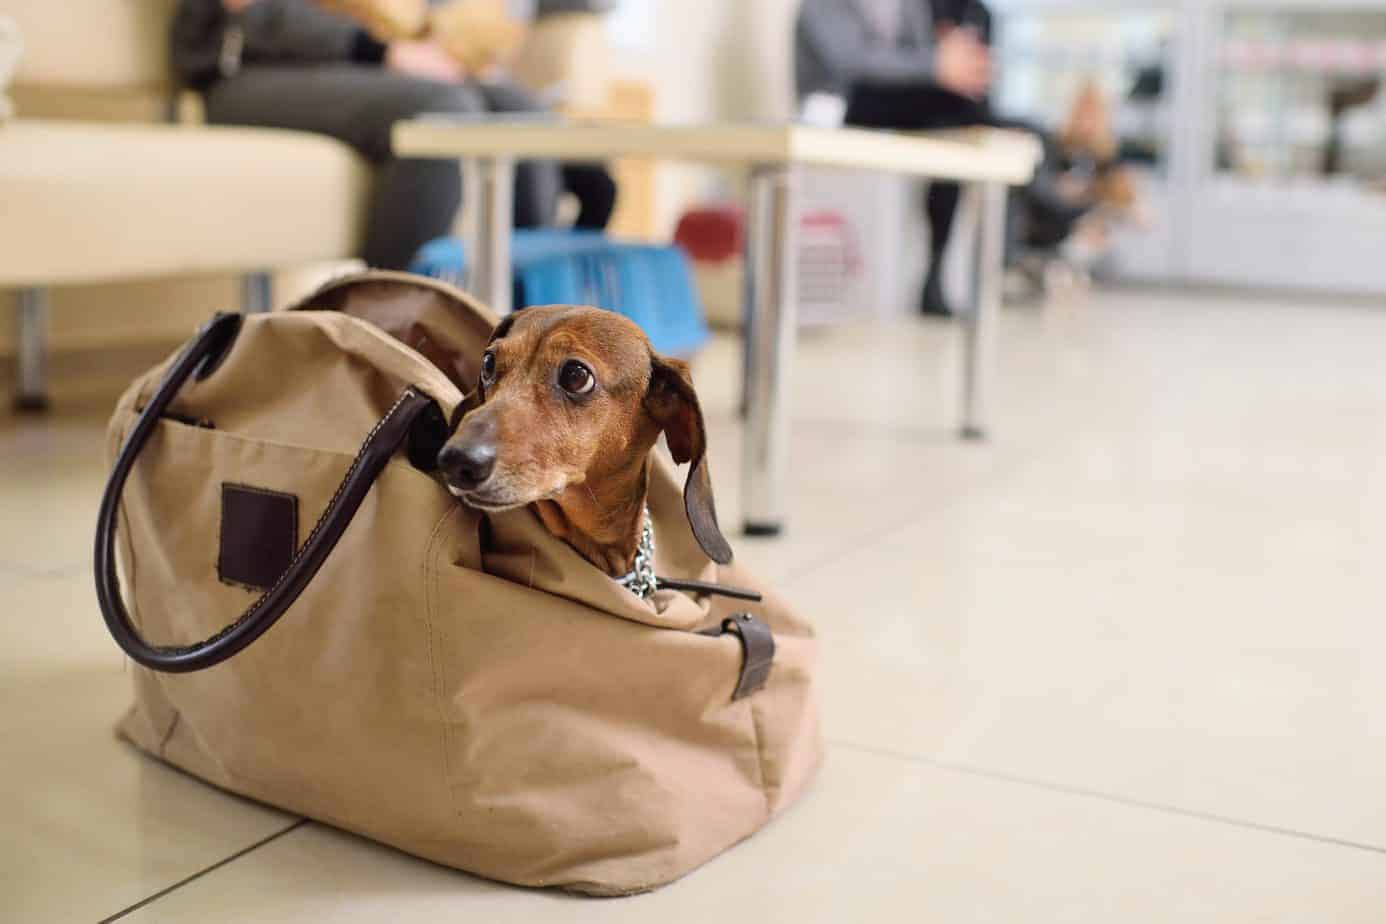 A dachshund is on the best list of travel dogs. The best dogs for travel have gentle dispositions, need little exercise, and enjoy being with people. For plane rides, small dogs are best.